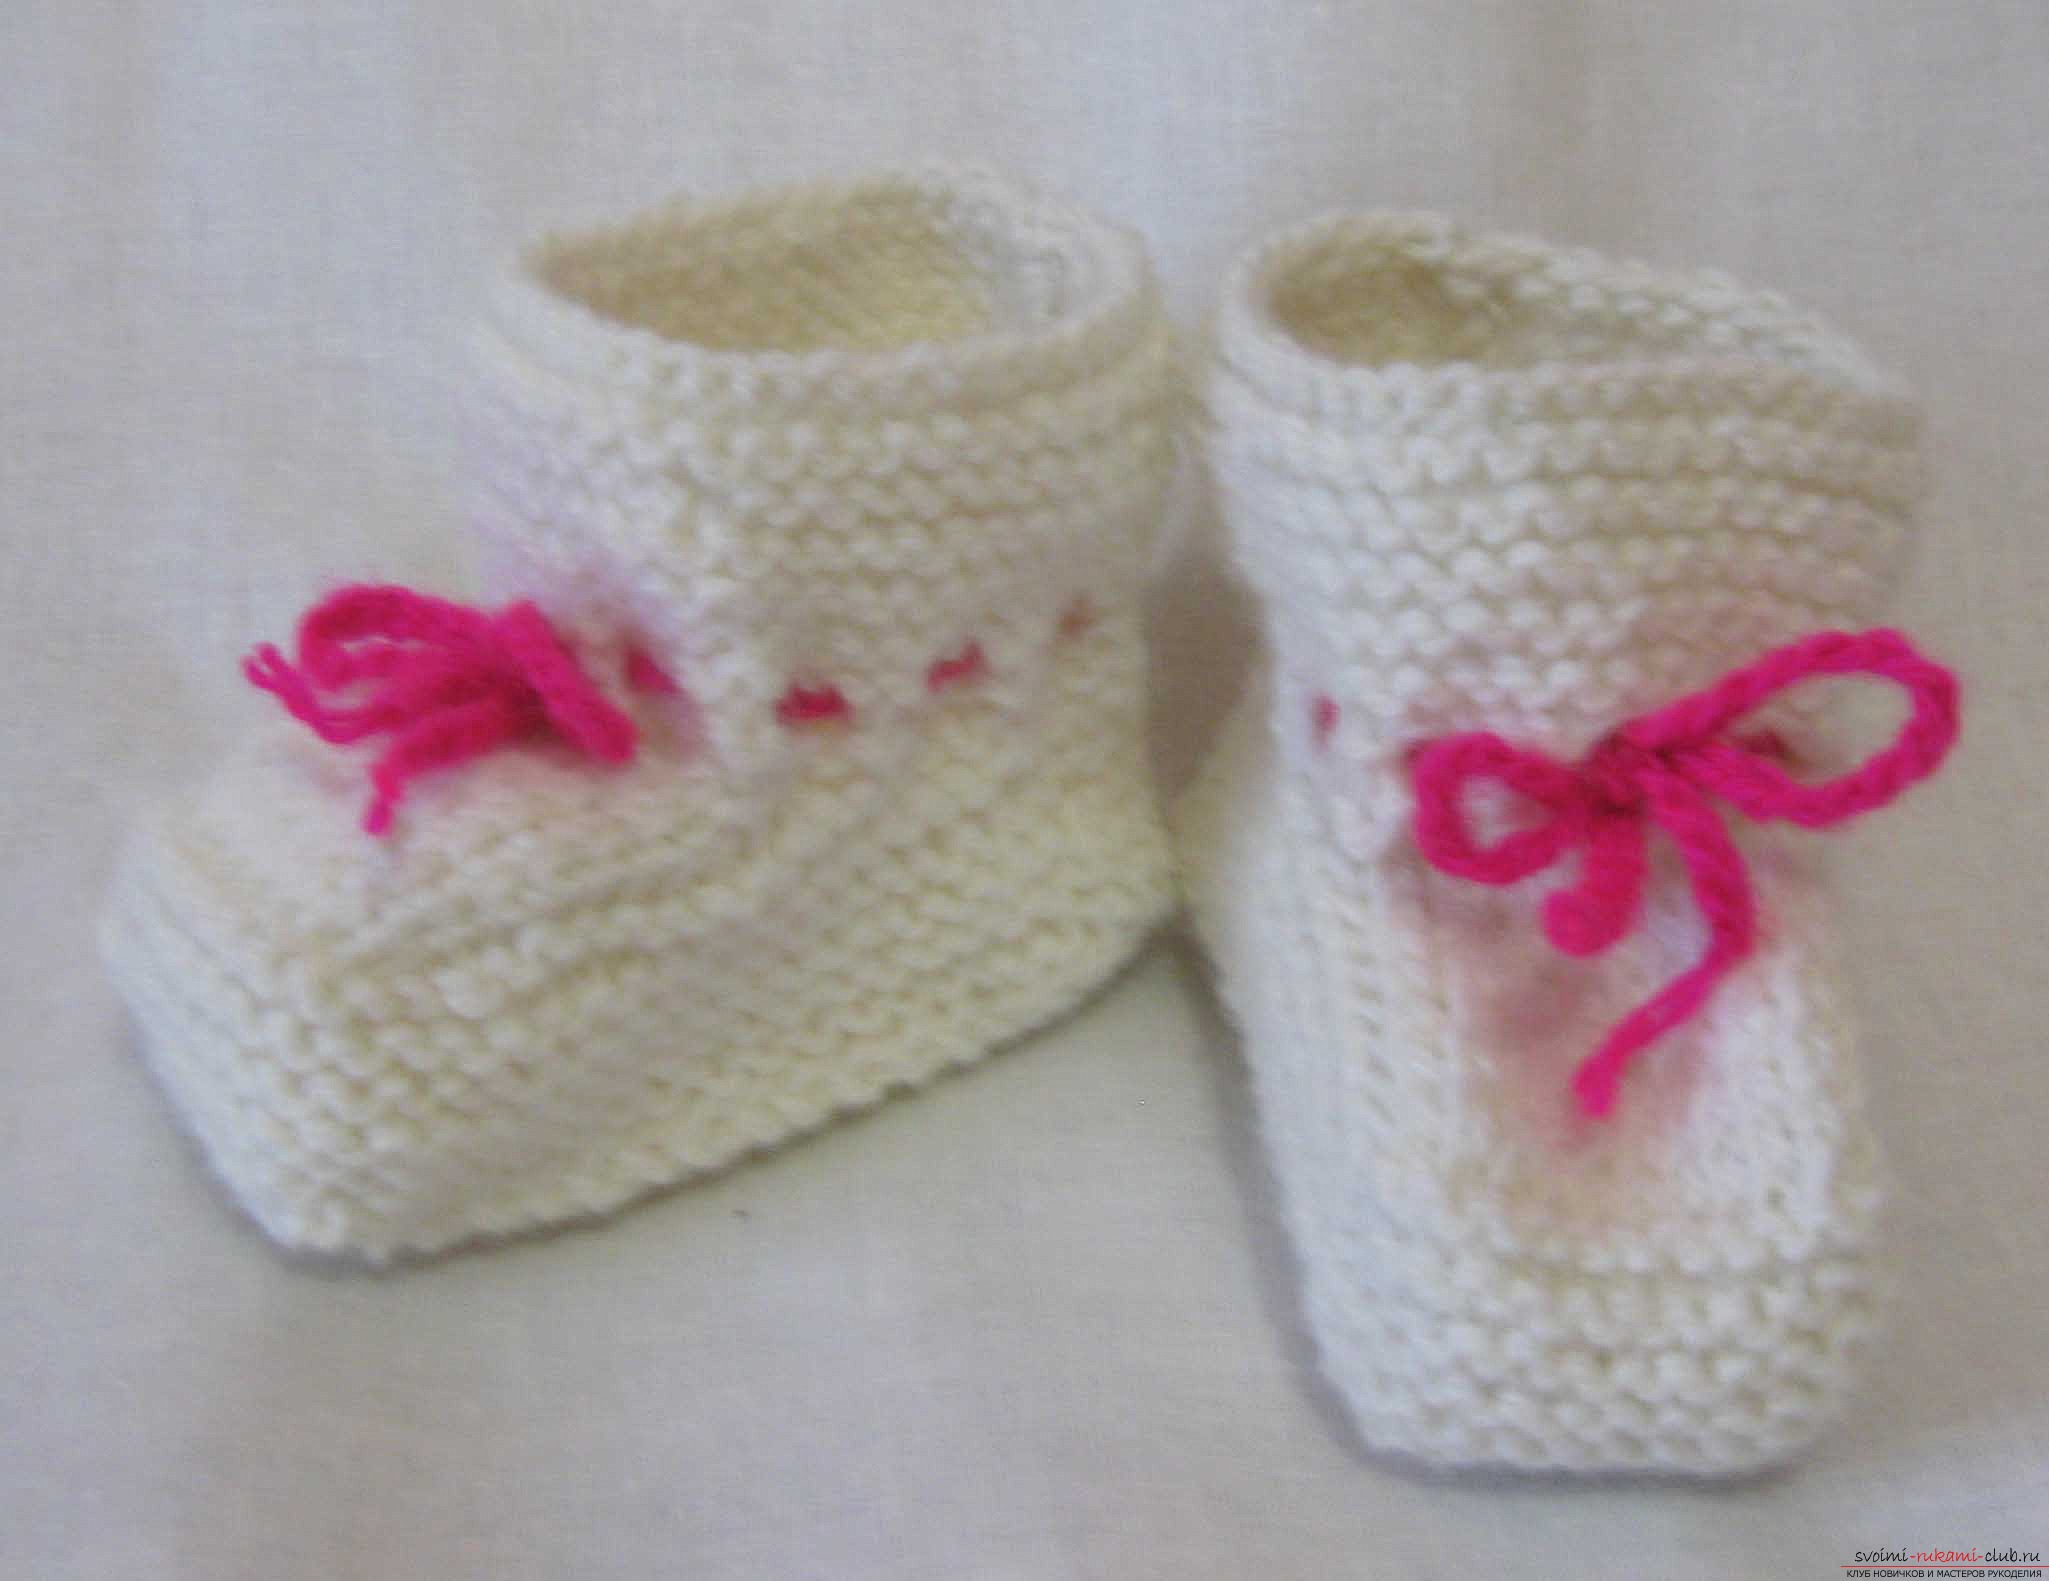 We knit baby booties with knitting needles. Boots for newborns with their own hands for beginner needlewomen. Photo # 2